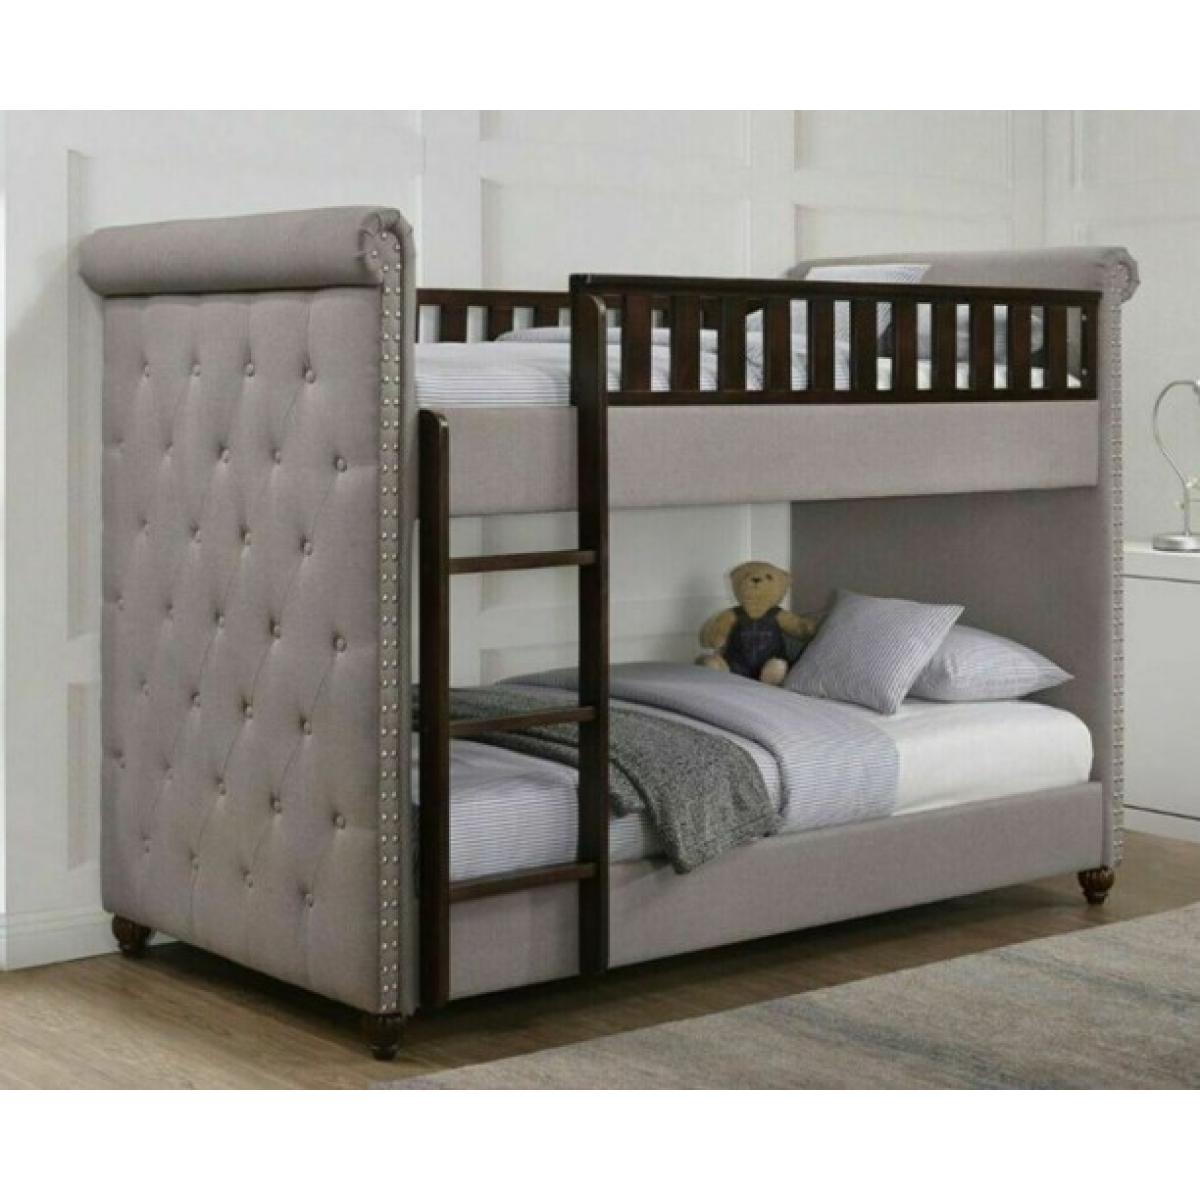 Rio Light Grey Linen Chesterfield Bunk Bed, Reading Lights For Bunk Beds